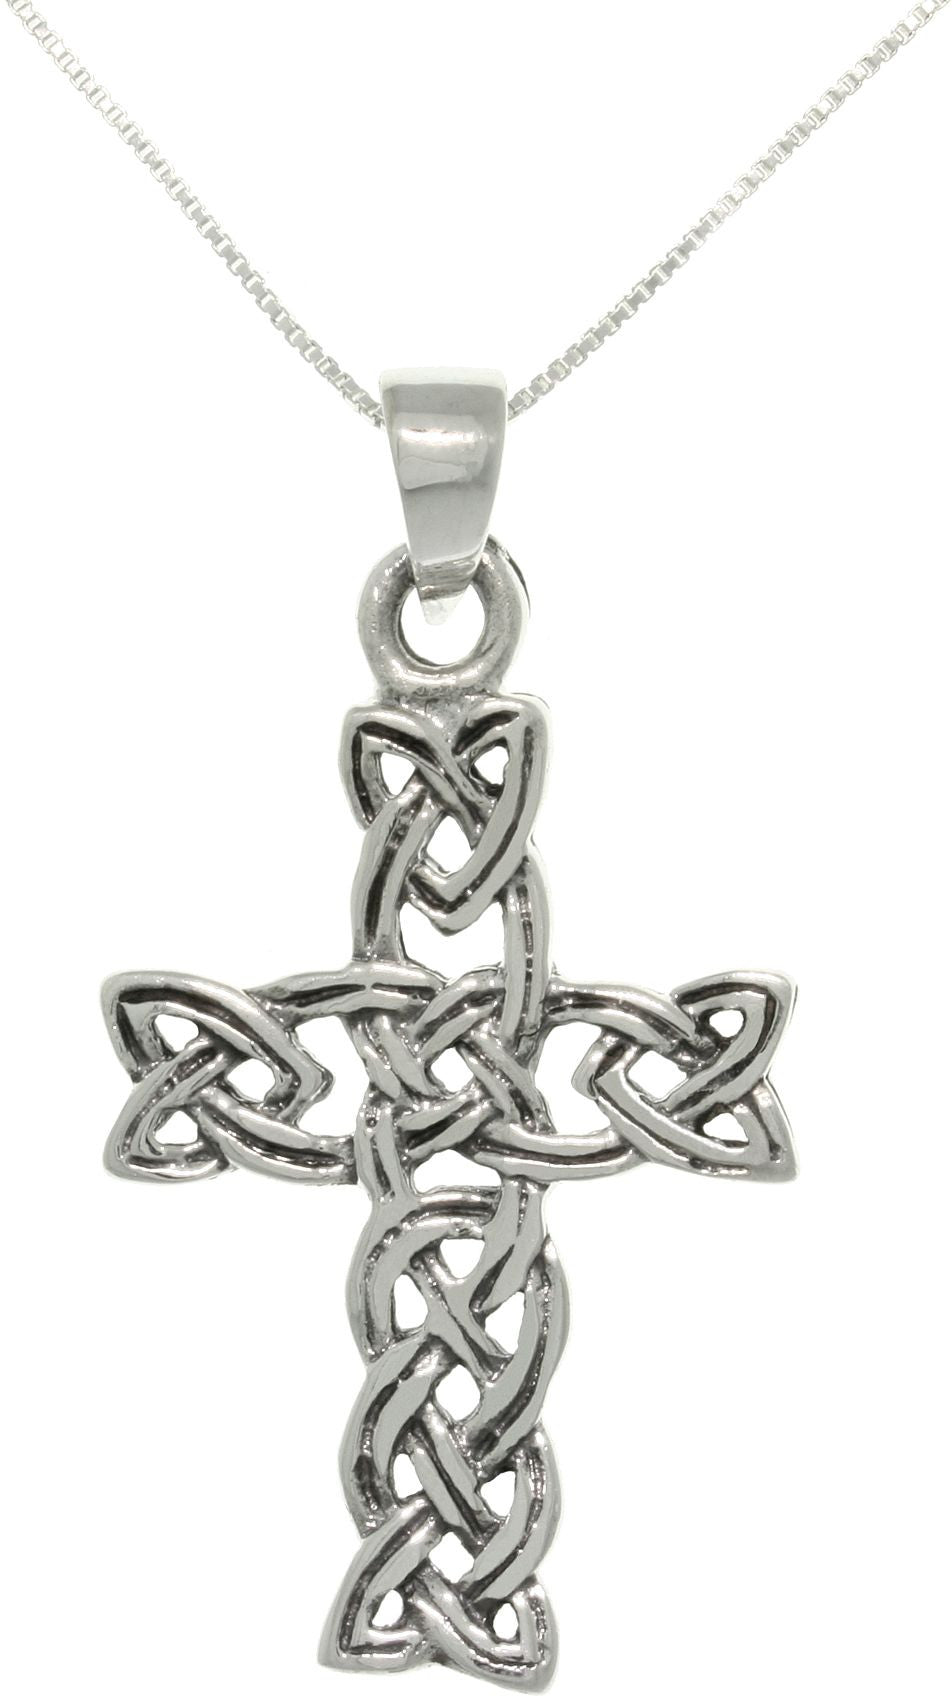 Jewelry Trends Sterling Silver Celtic Braid Cross Pendant with 18 Inch Box Chain Necklace